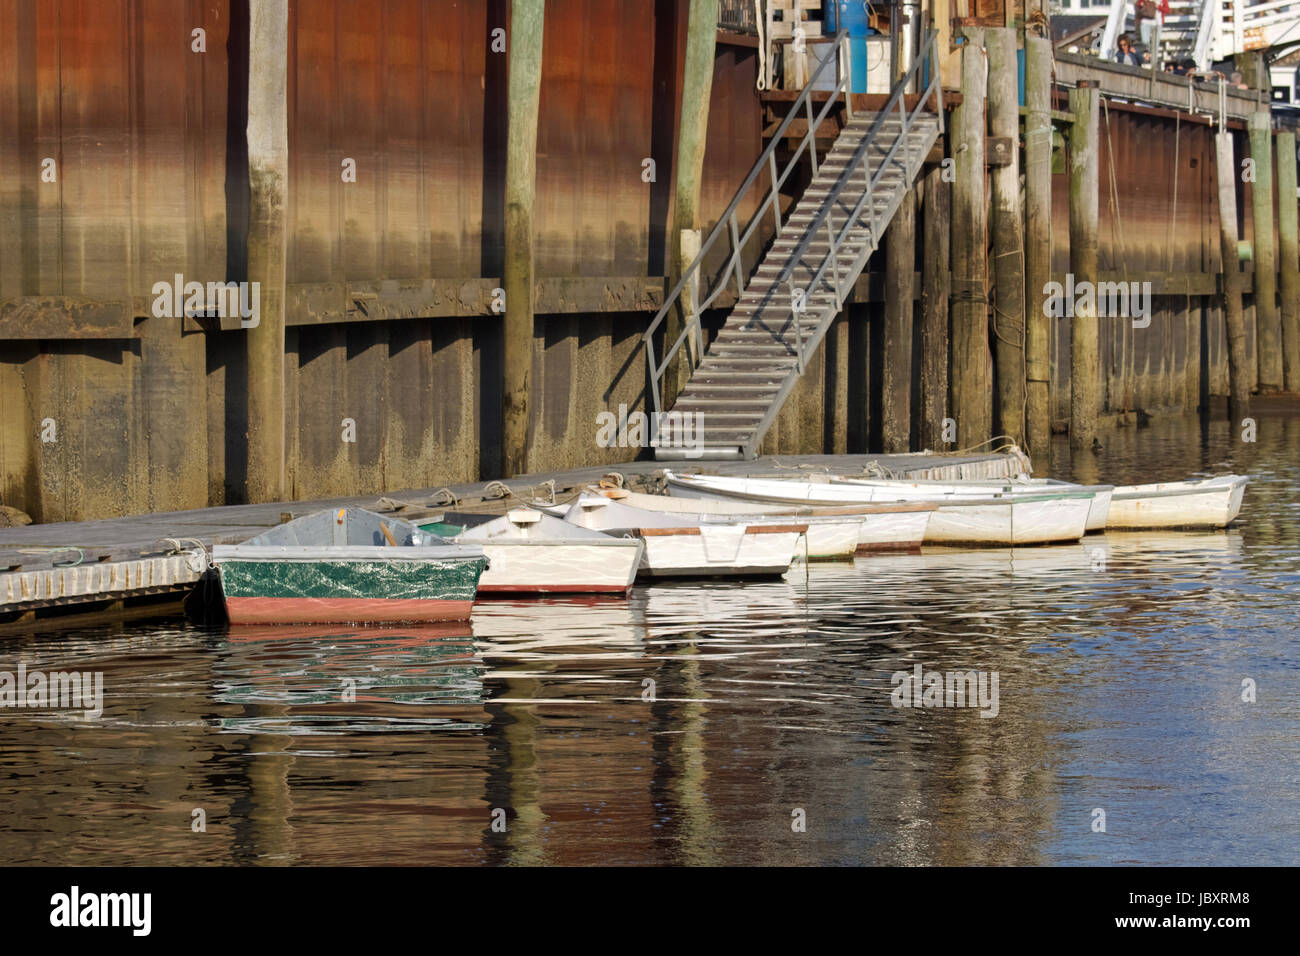 Dories tied to the fishing pier at Perkins Cove, Ogunquit, Maine.  These small boats are used by fisherman to and from their lobster boats. Stock Photo